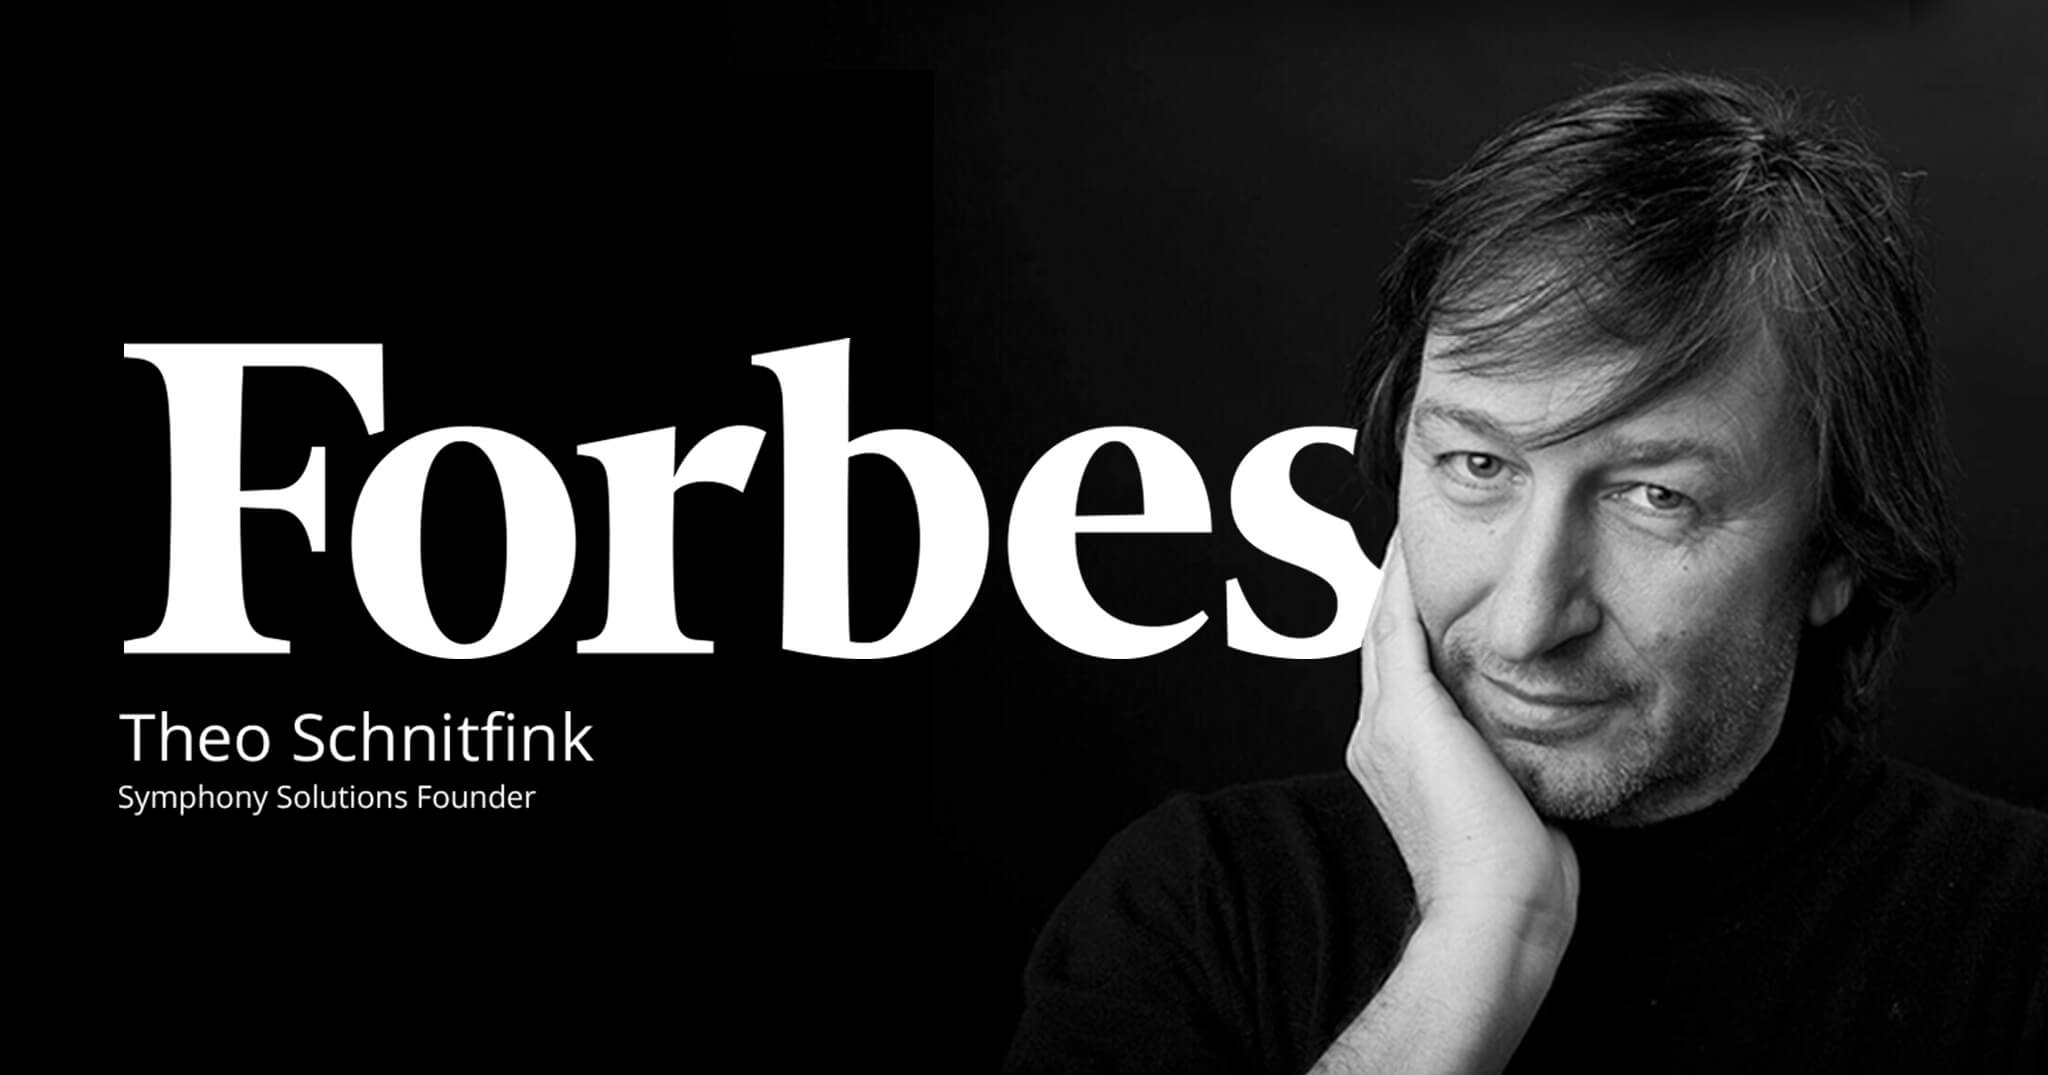 Symphony Solutions founder Theo Schnitfink, Forbes interview